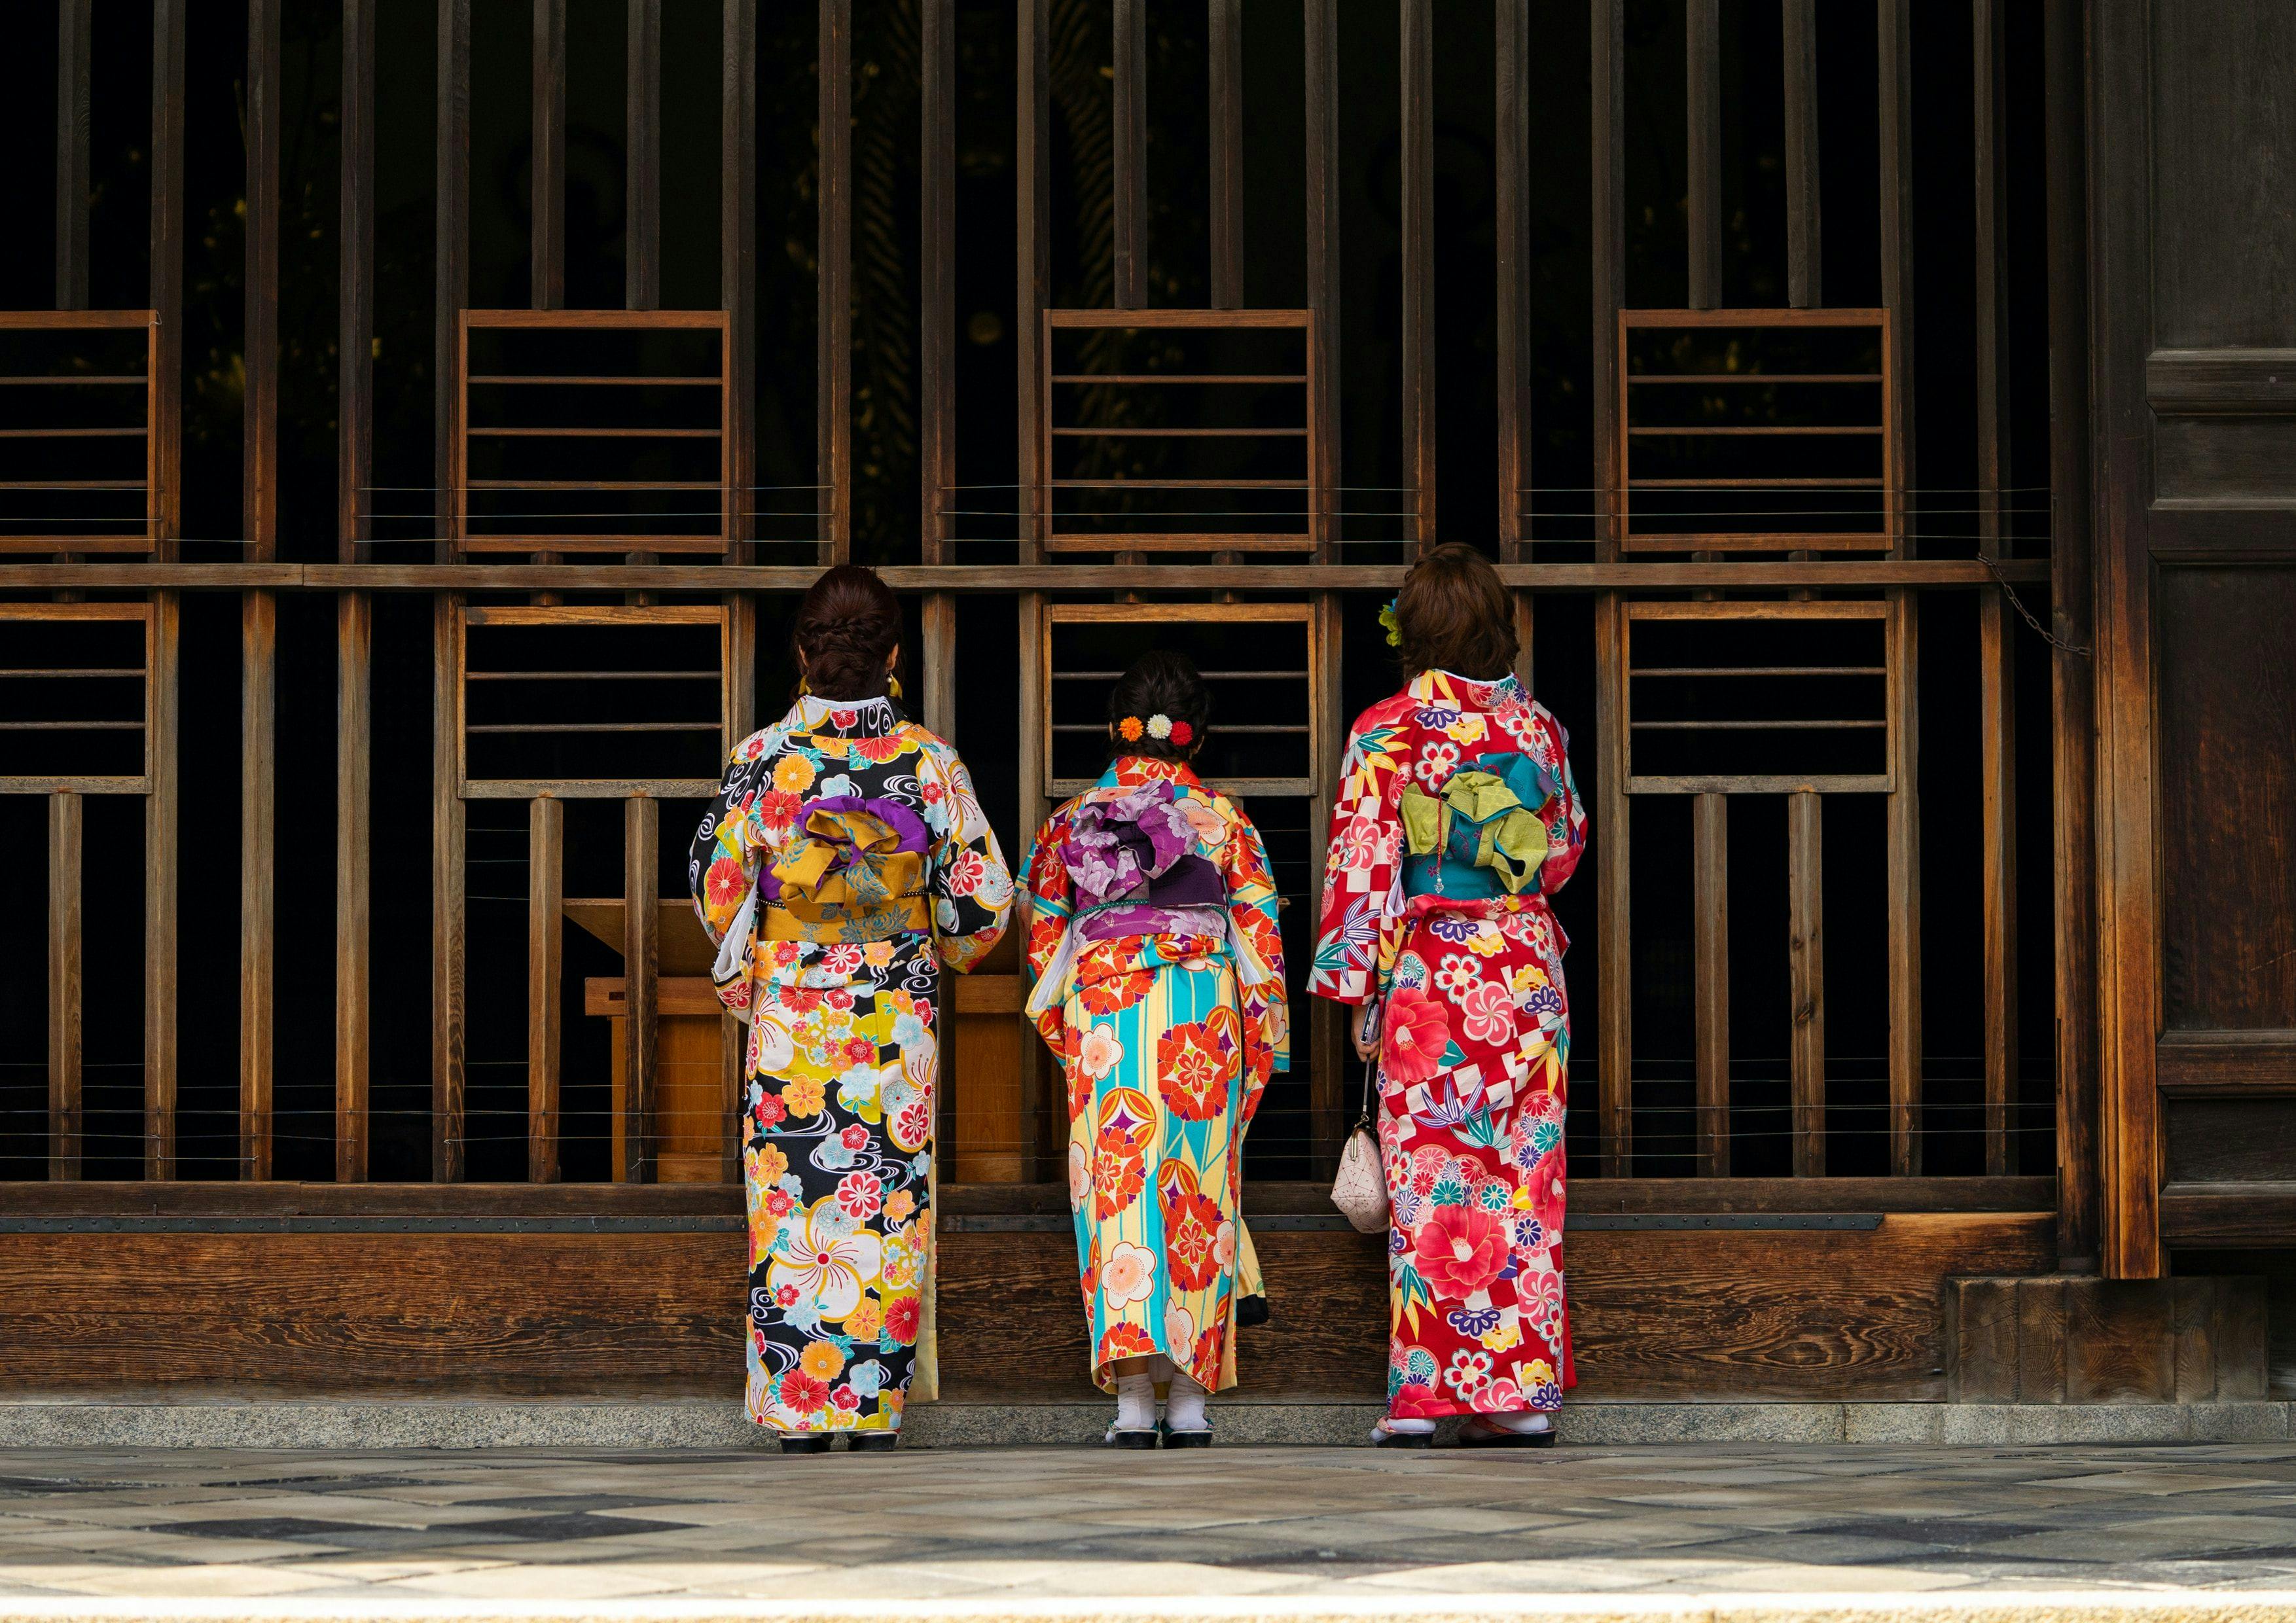 Three geishas standing next to a wooden wall